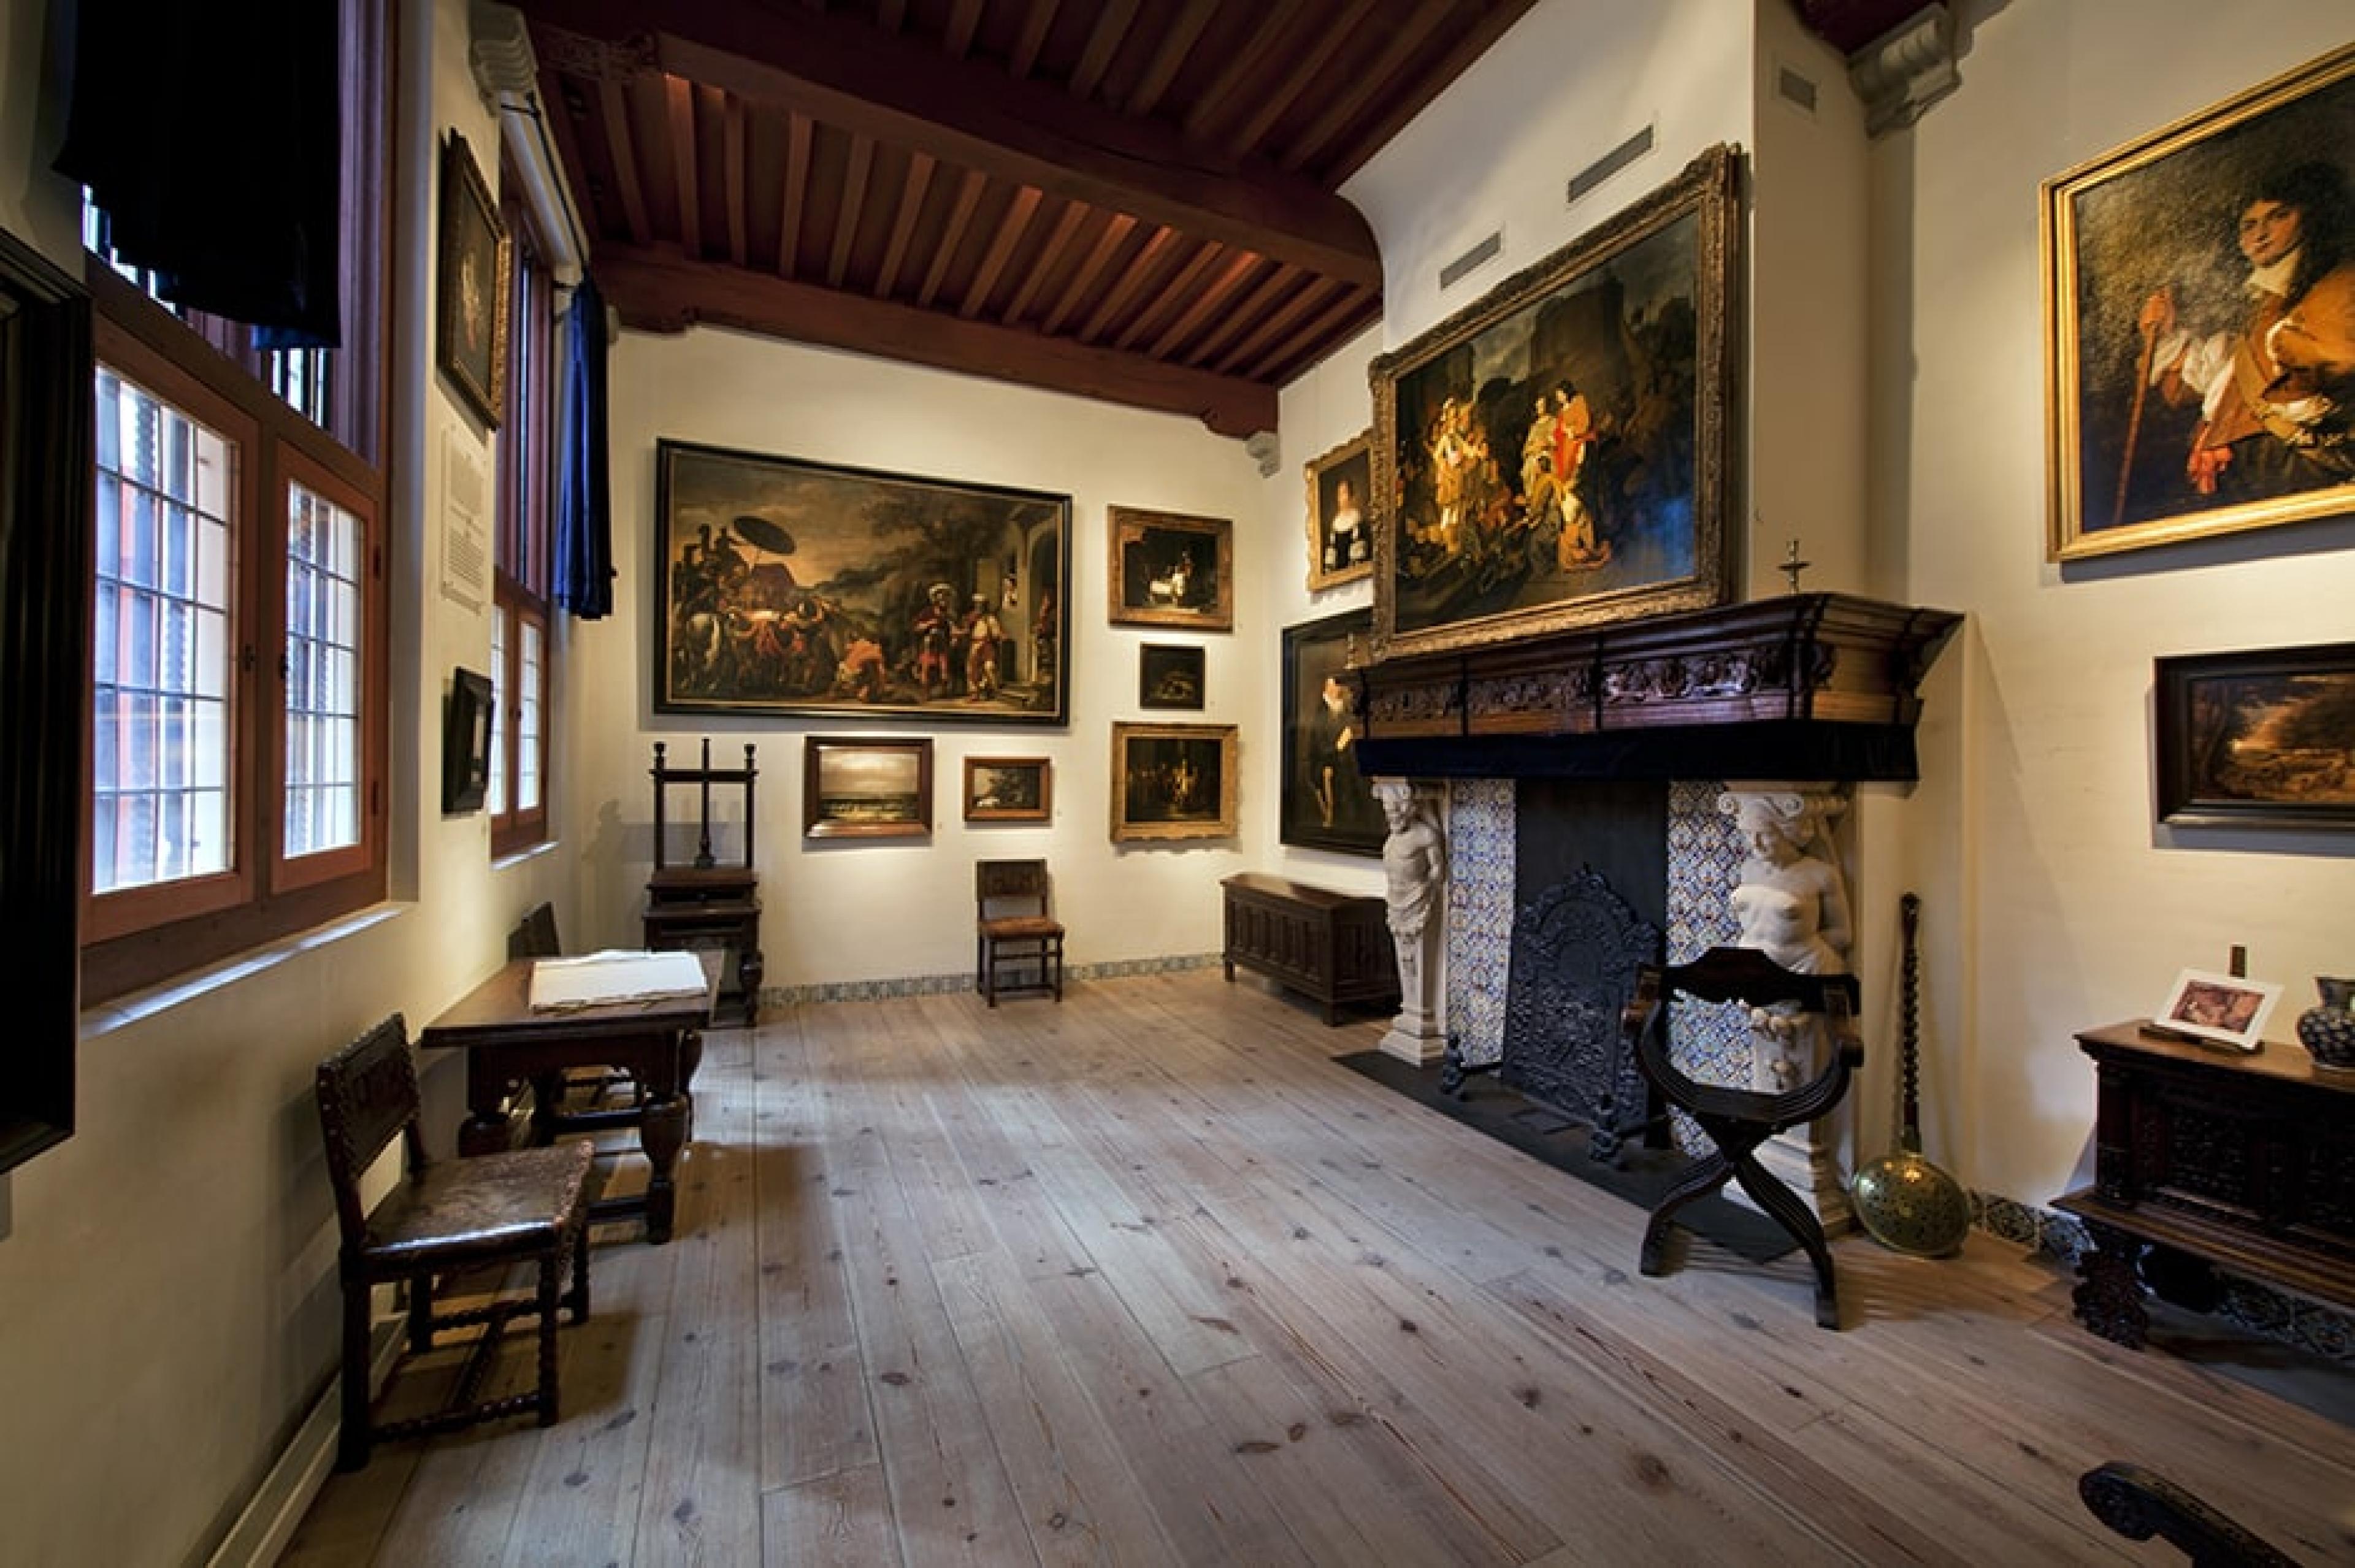 Interior View-Rembrandt House Museum ,Amsterdam, Netherlands-Courtesy I Amsterdam